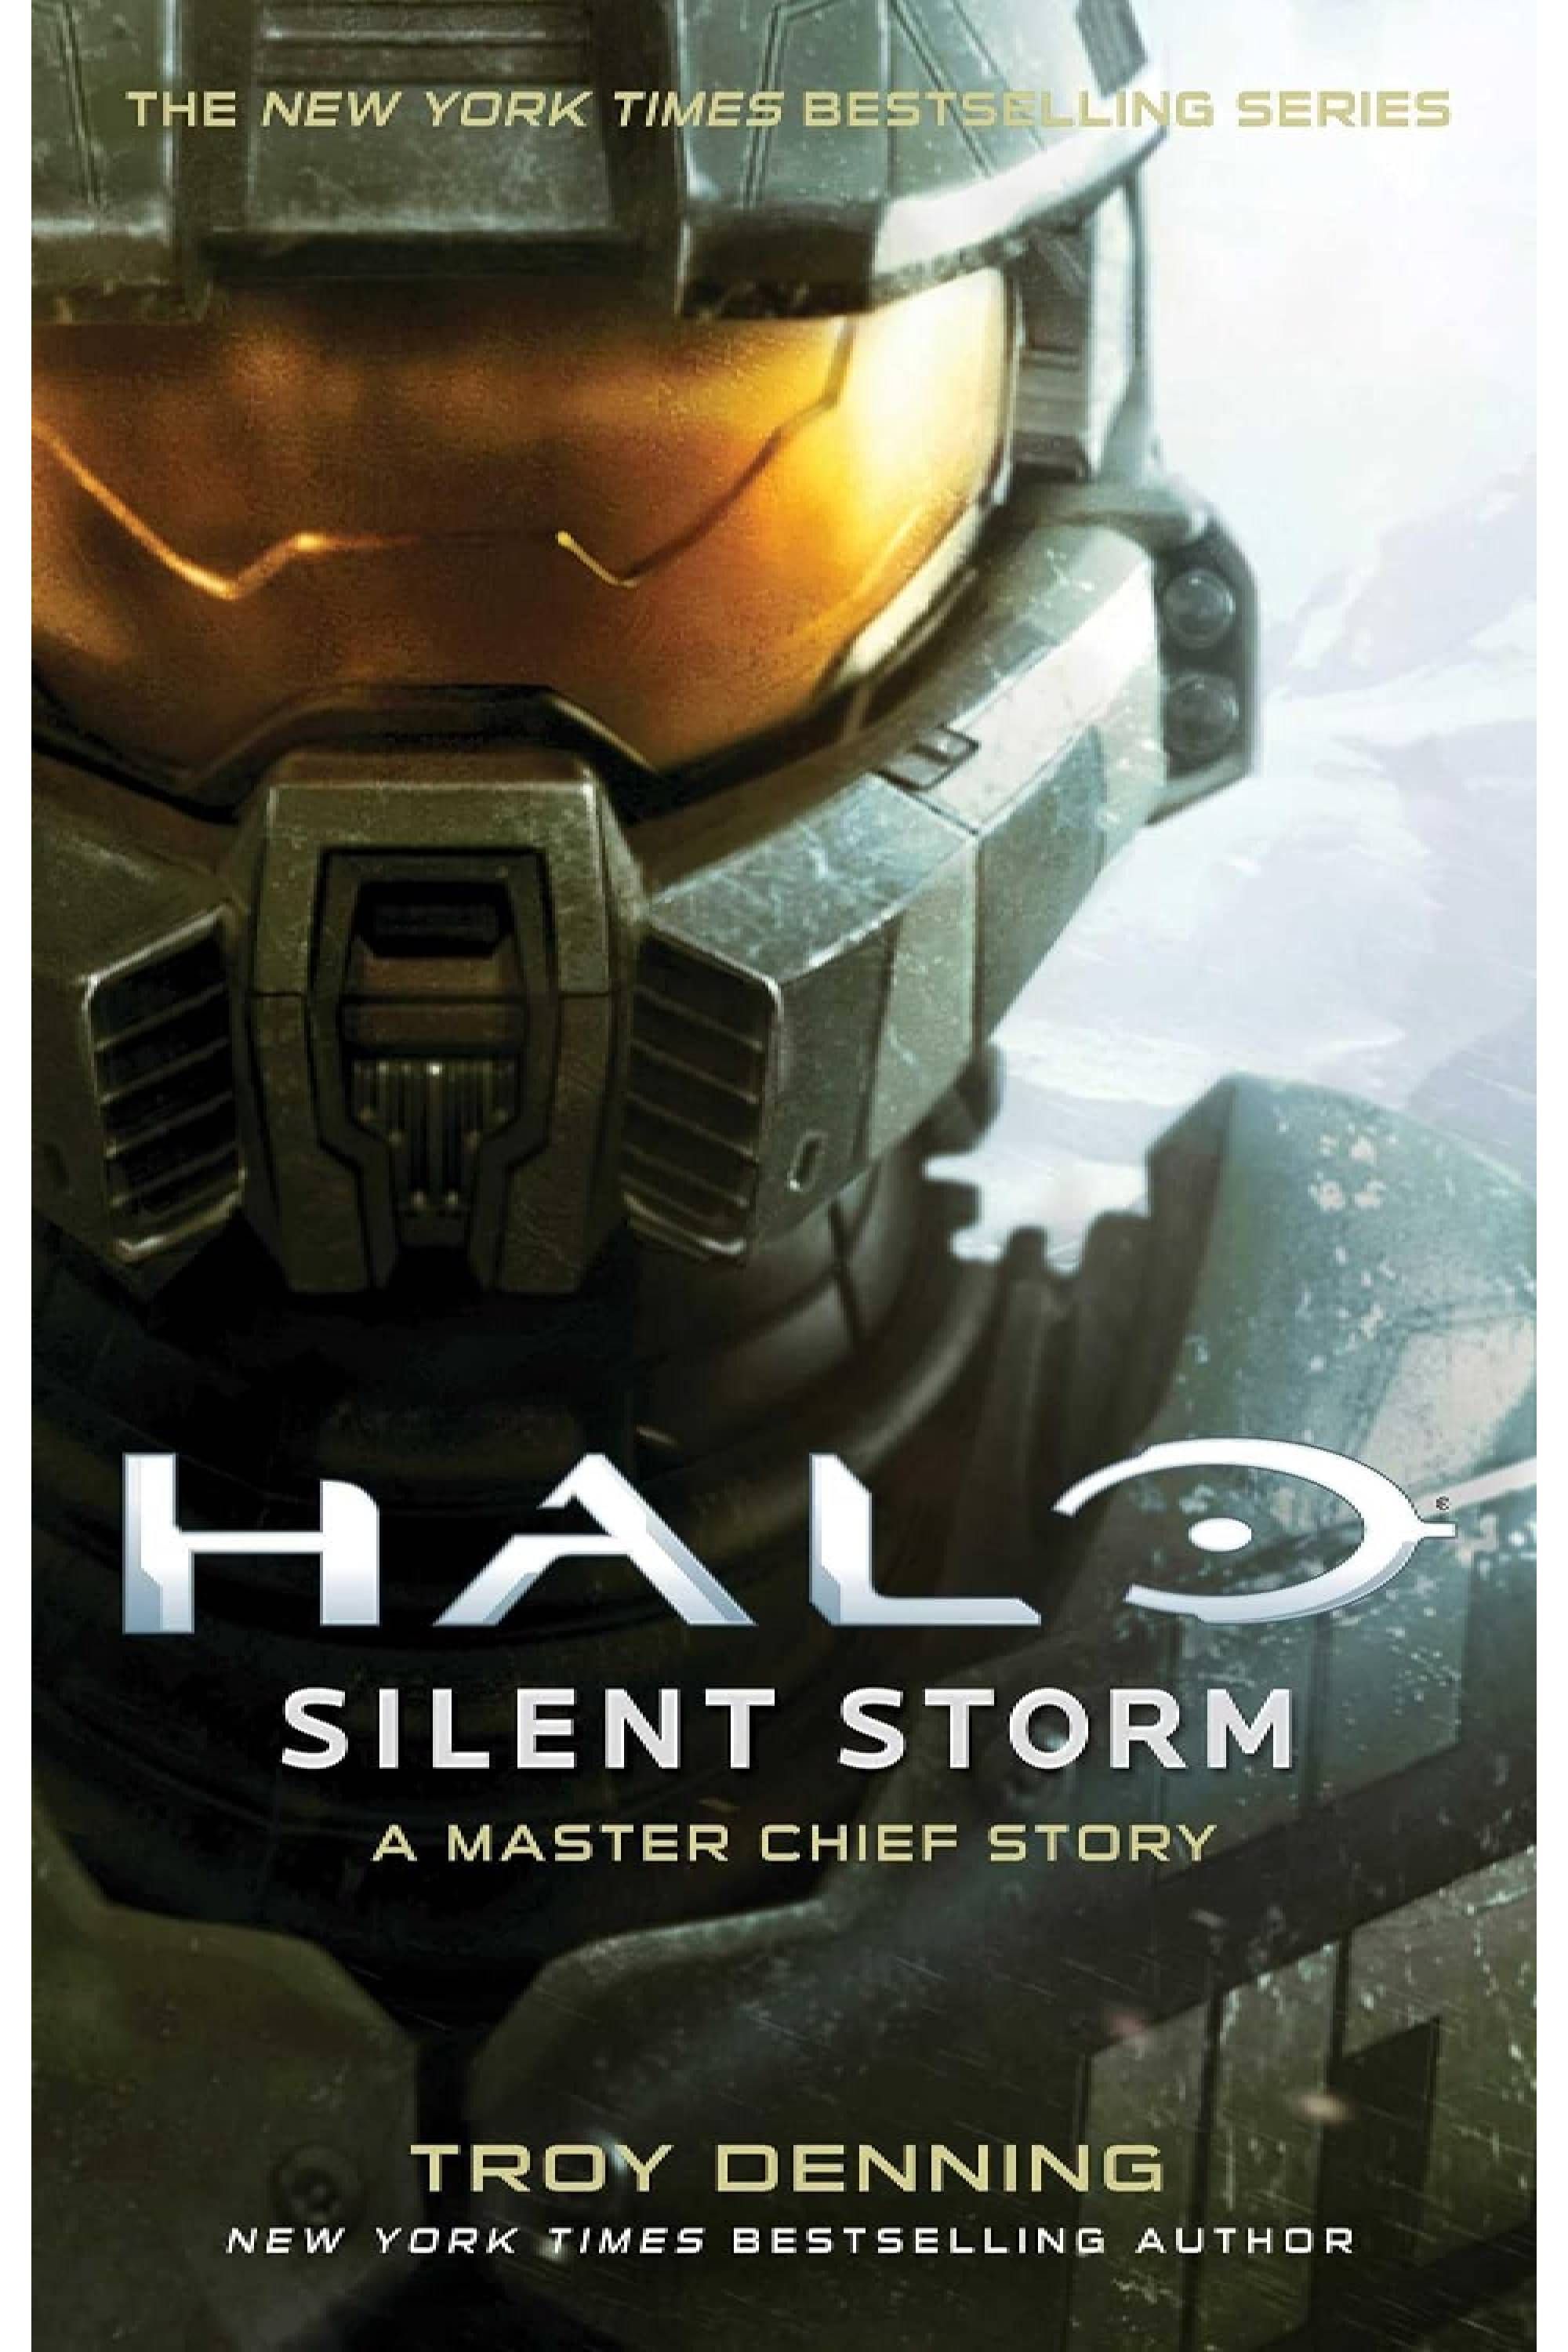 Halo Silent Storm - A Master Chief Story